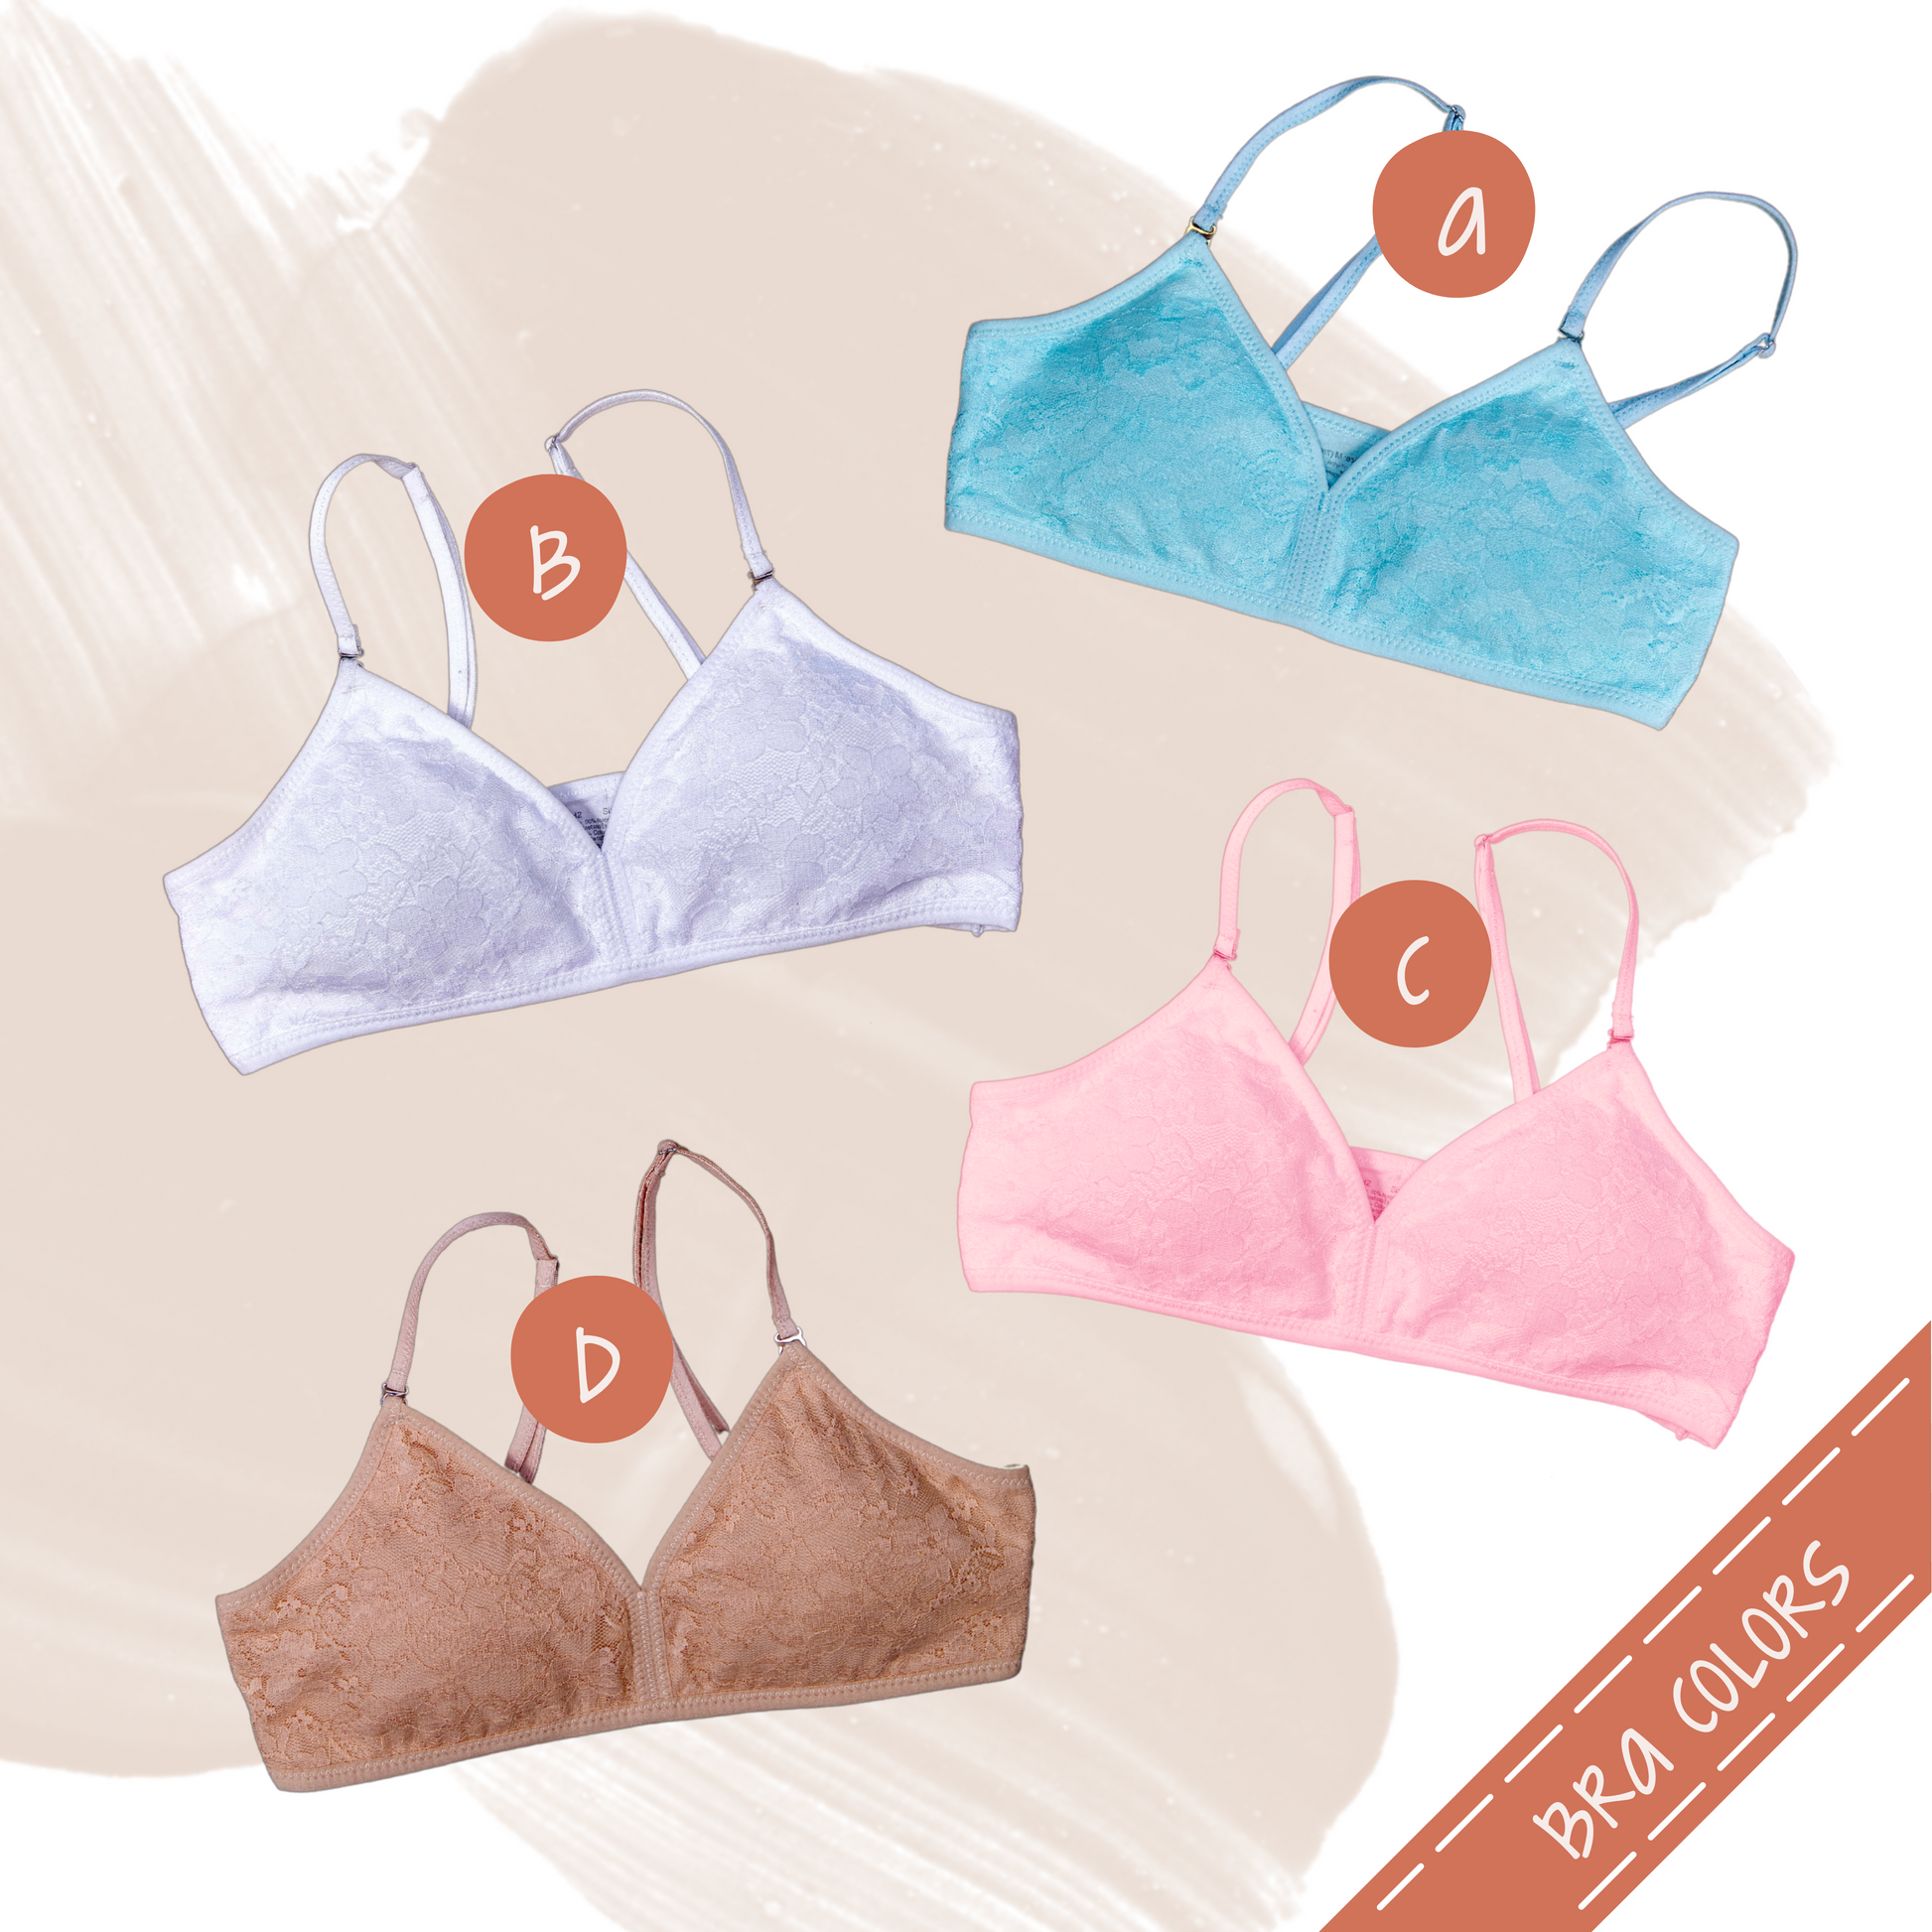 BRA-LA! You will love this Lace bra strap cover! ONLY at Grace and